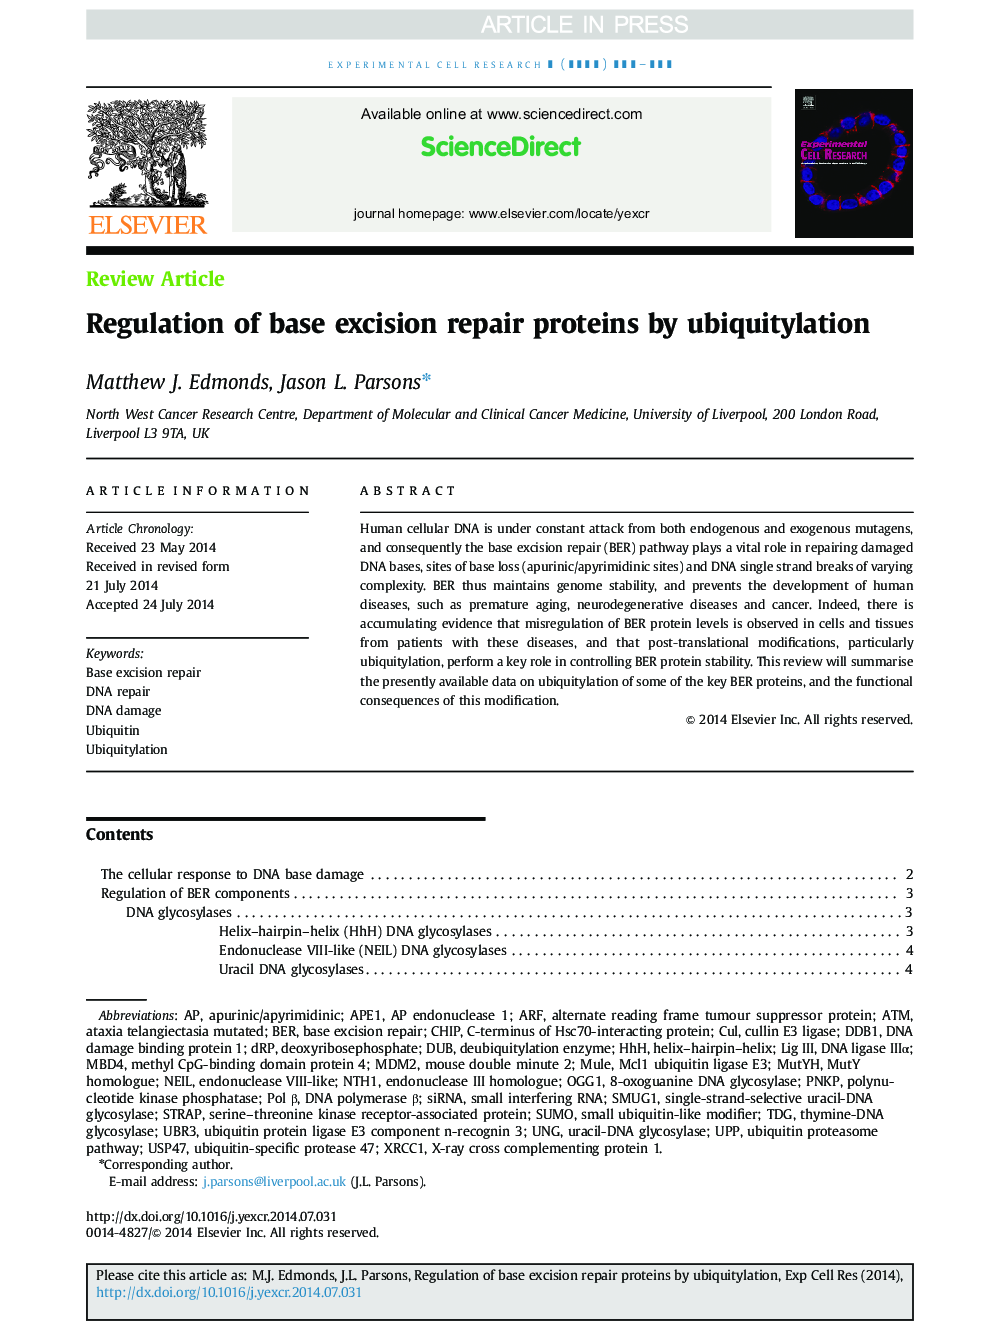 Regulation of base excision repair proteins by ubiquitylation